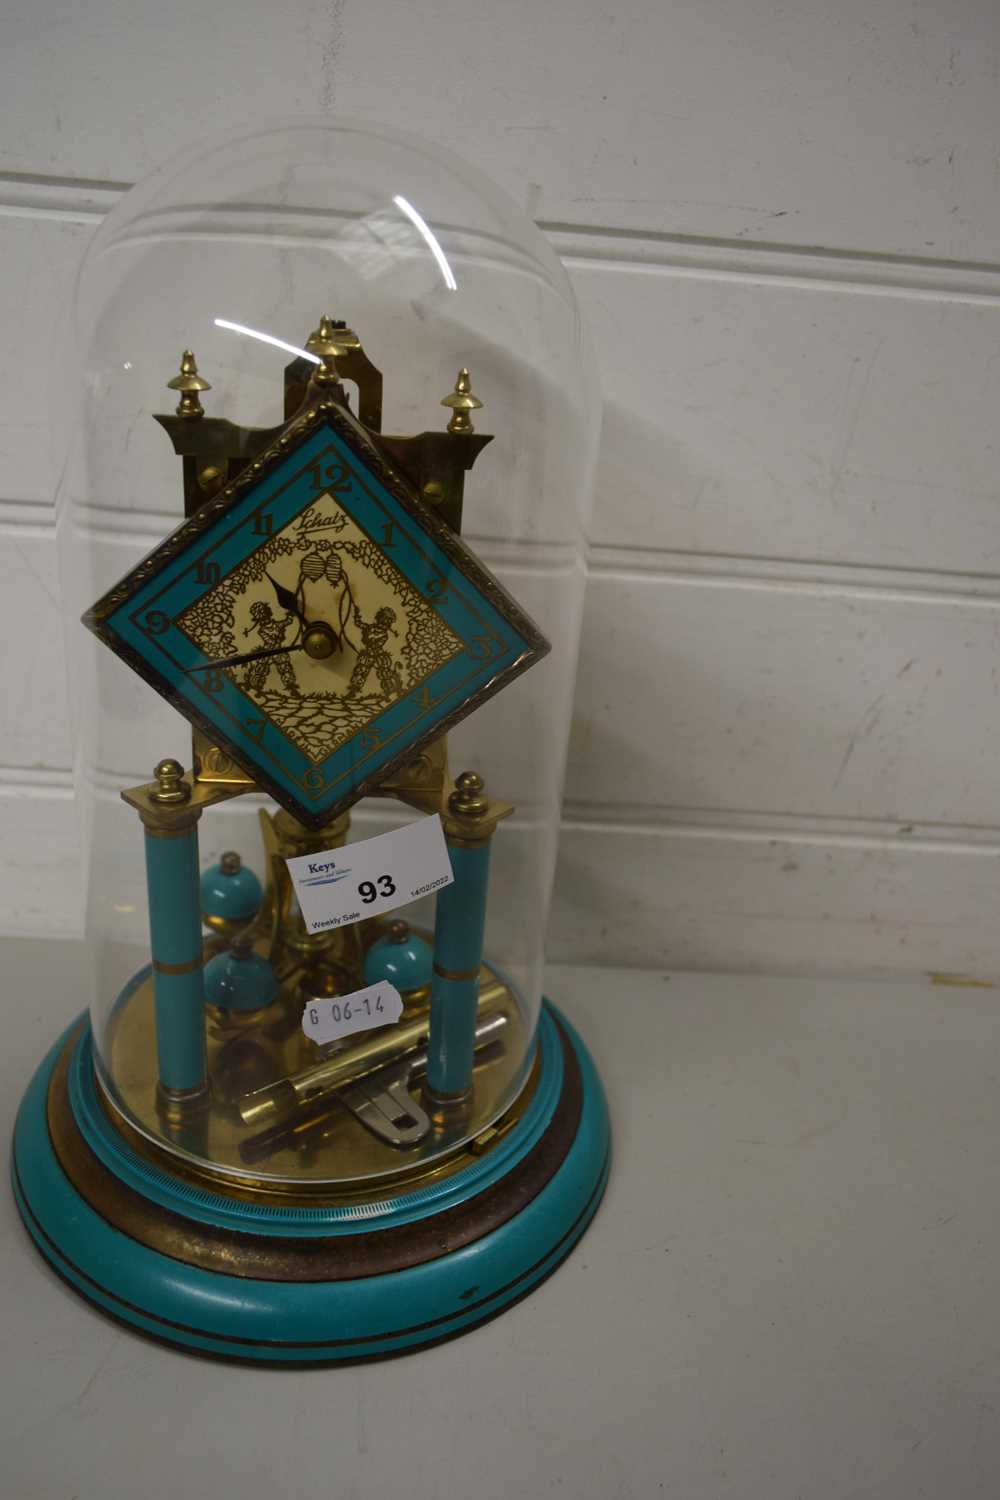 Lot 93 - CLOCK UNDER GLASS DOME